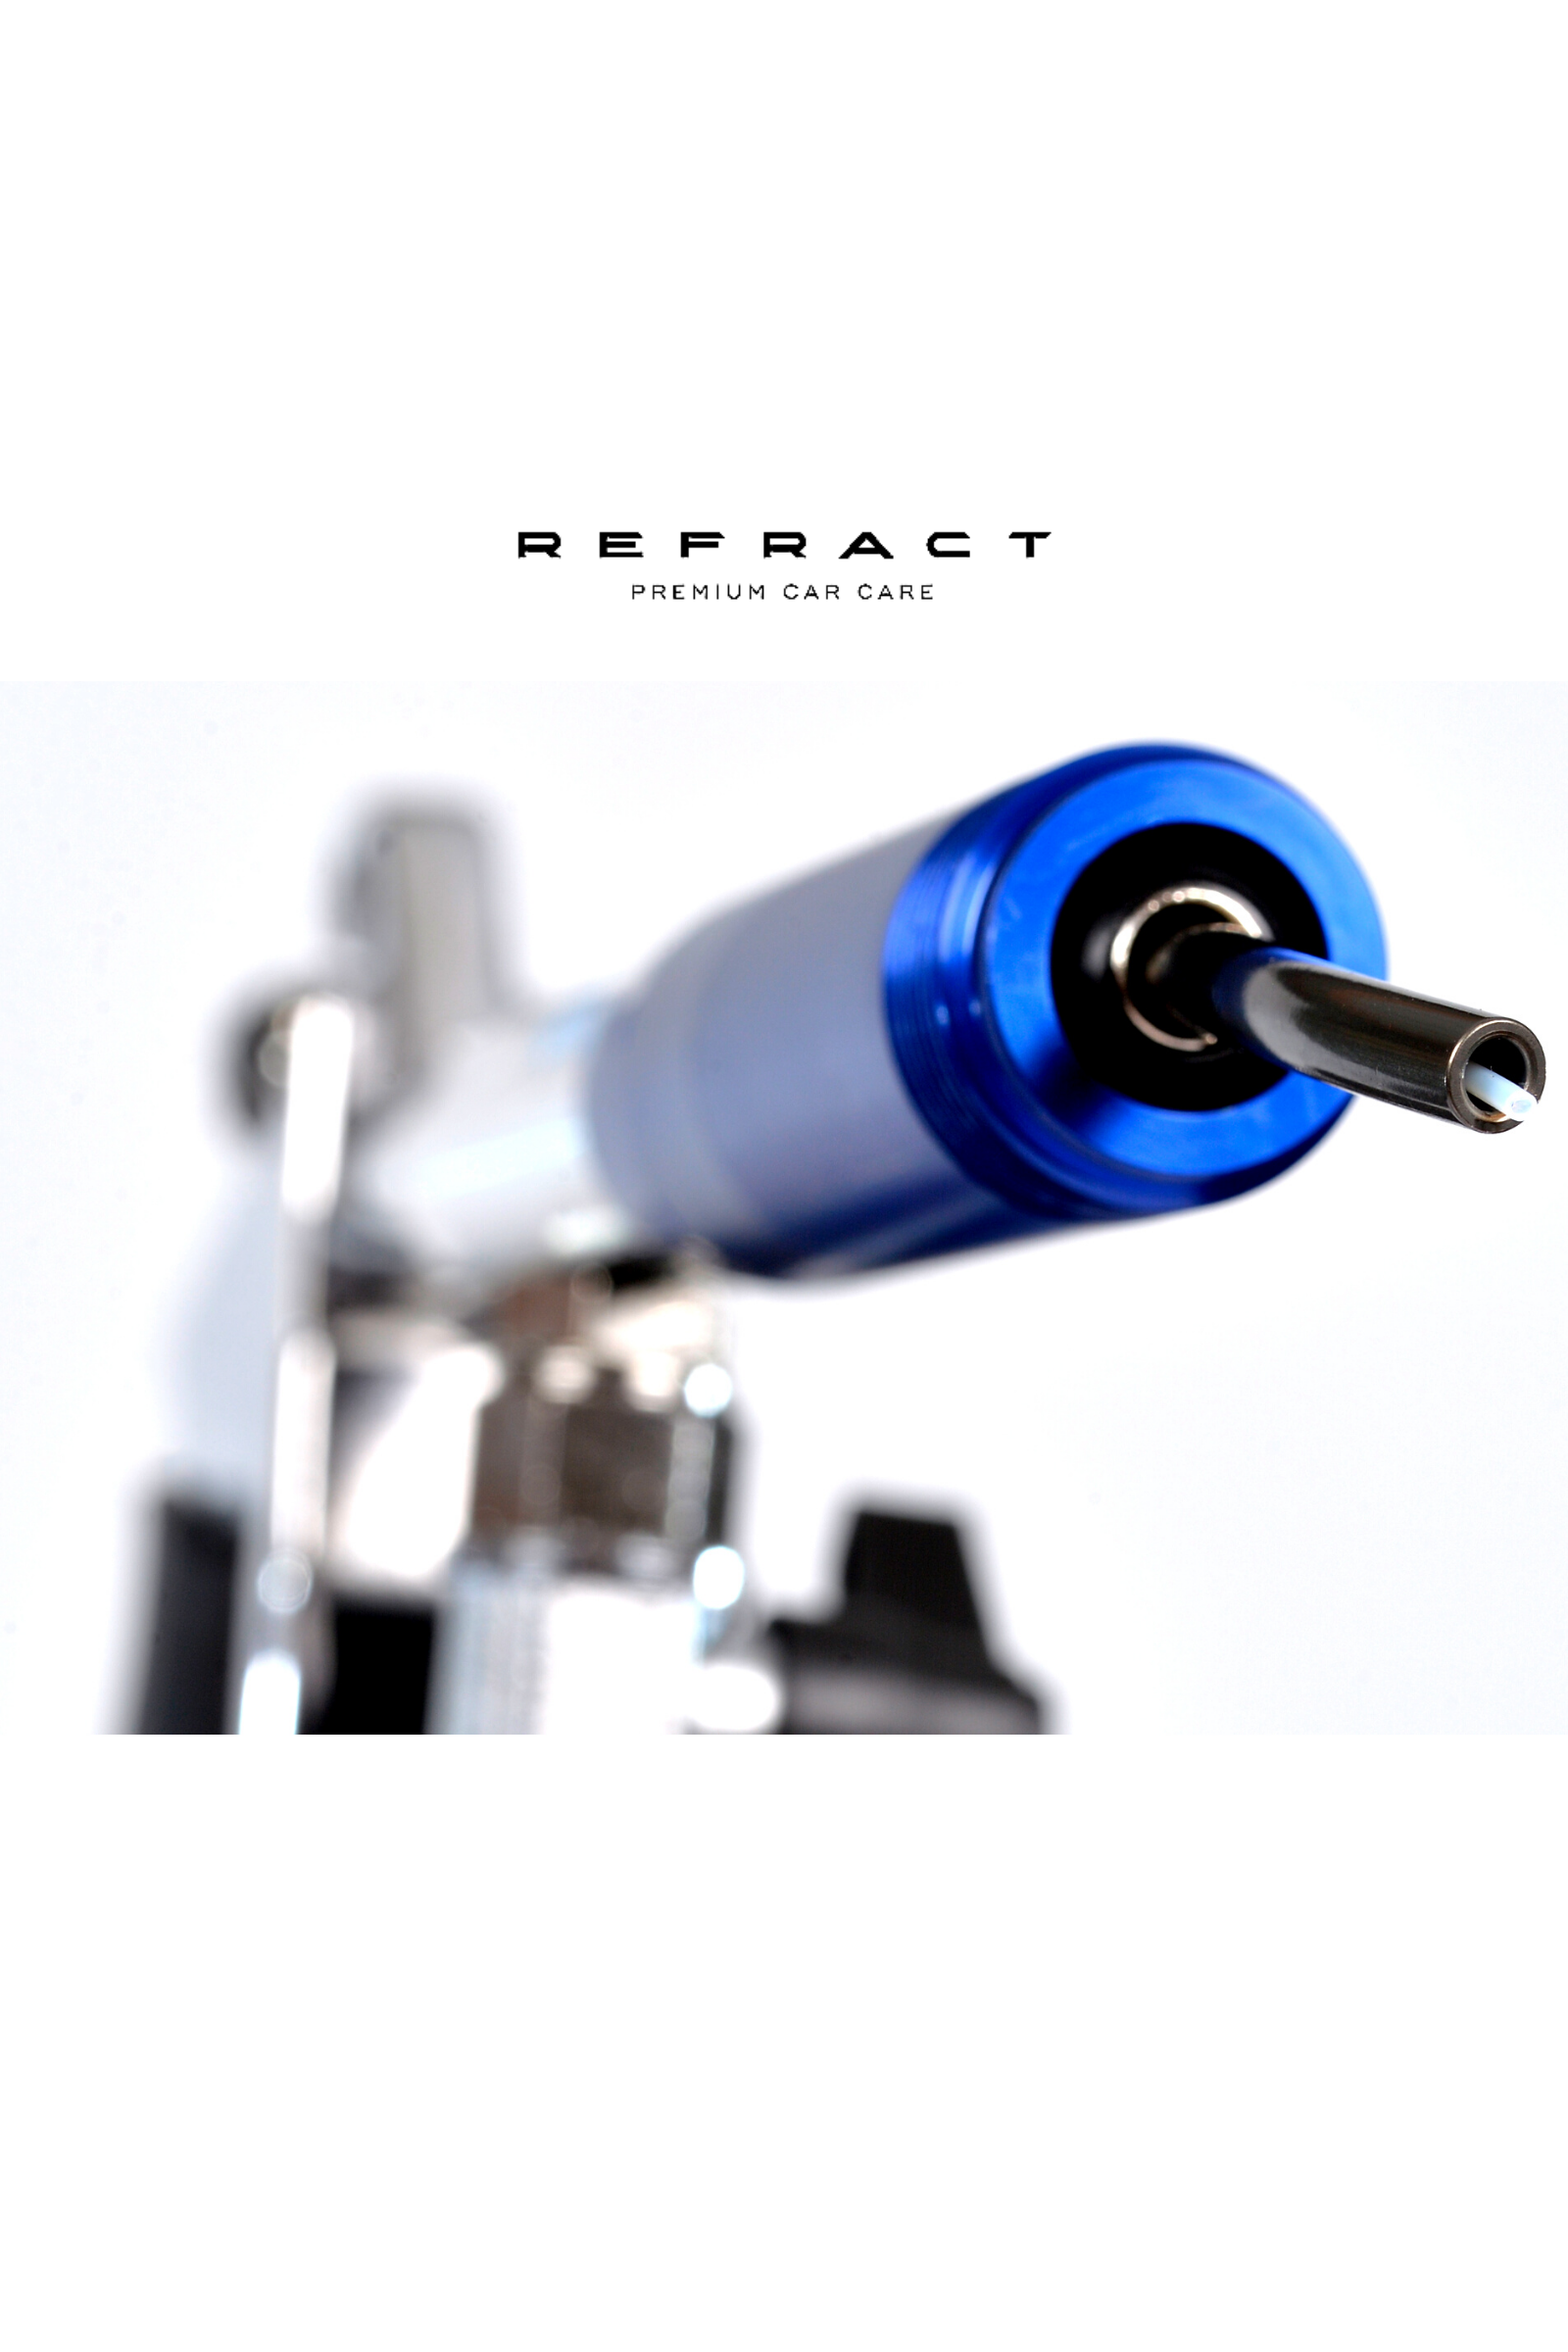 Refract Premium Car Care Products REFRACT FURY and Storm Cleaning Gun Tornador $299.95